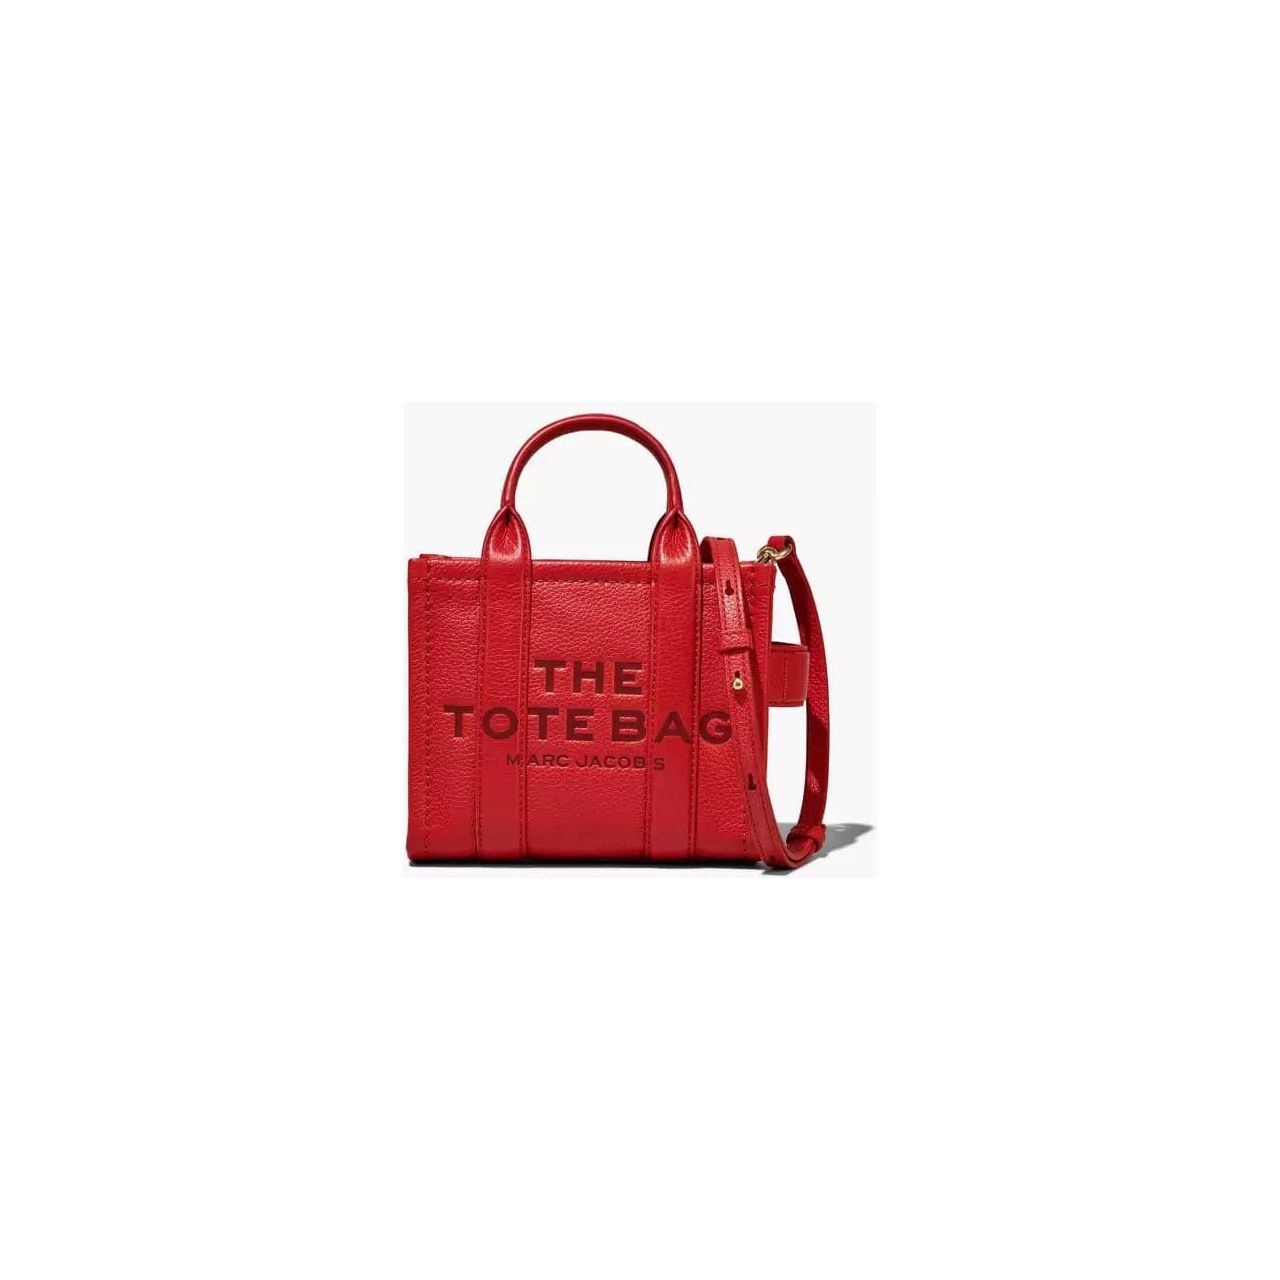 MARK JACOBS THE
LEATHER MICRO TOTE BAG - Yooto